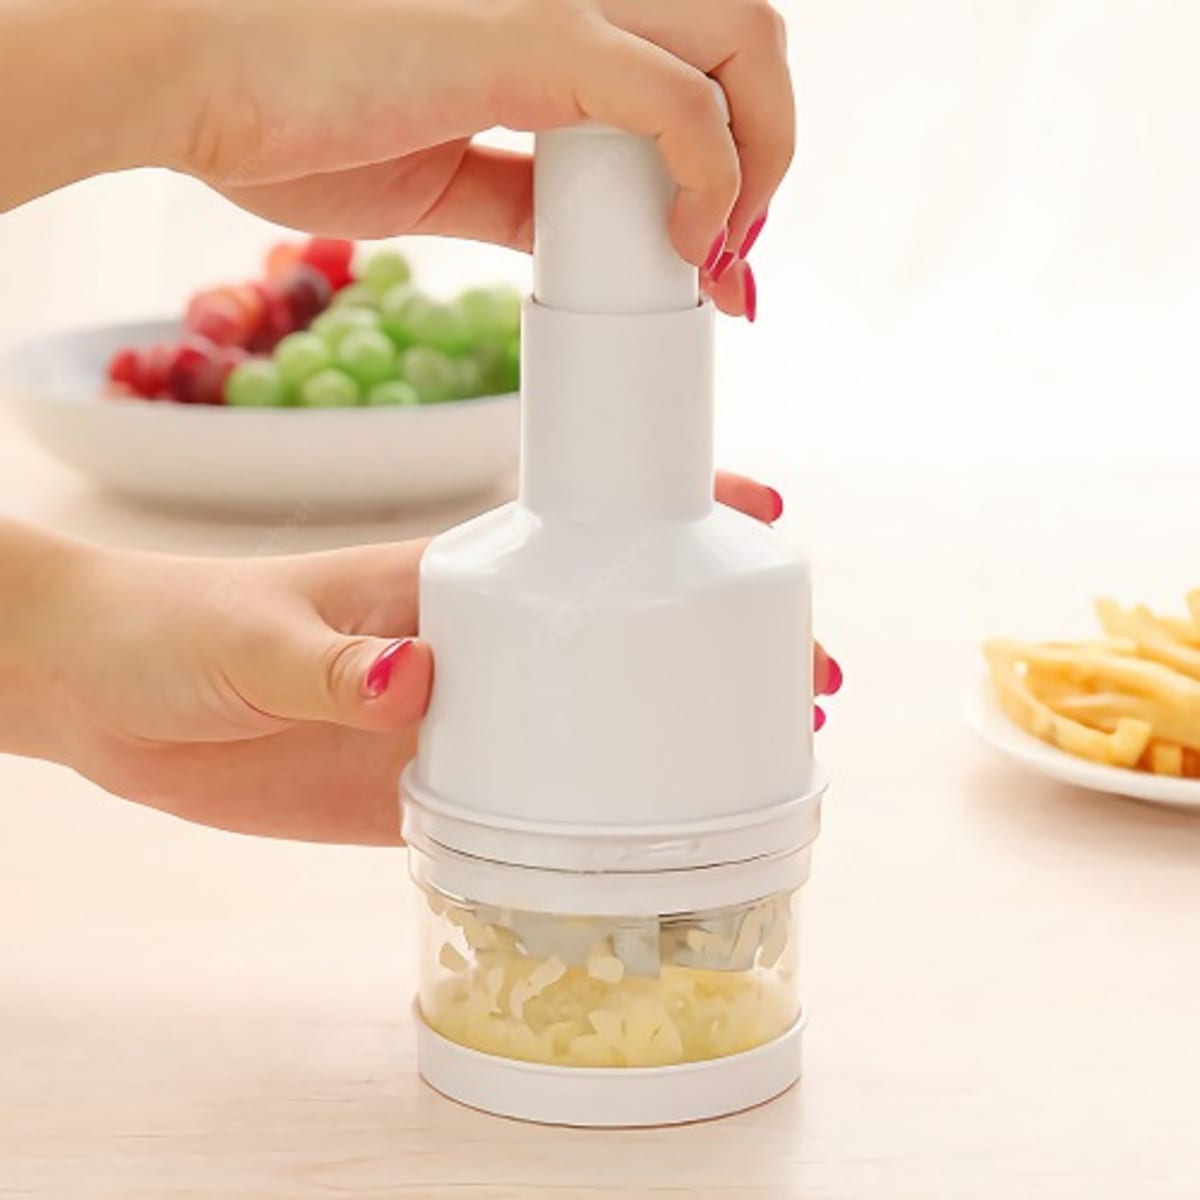 Prep Solutions French Fry Cutter 